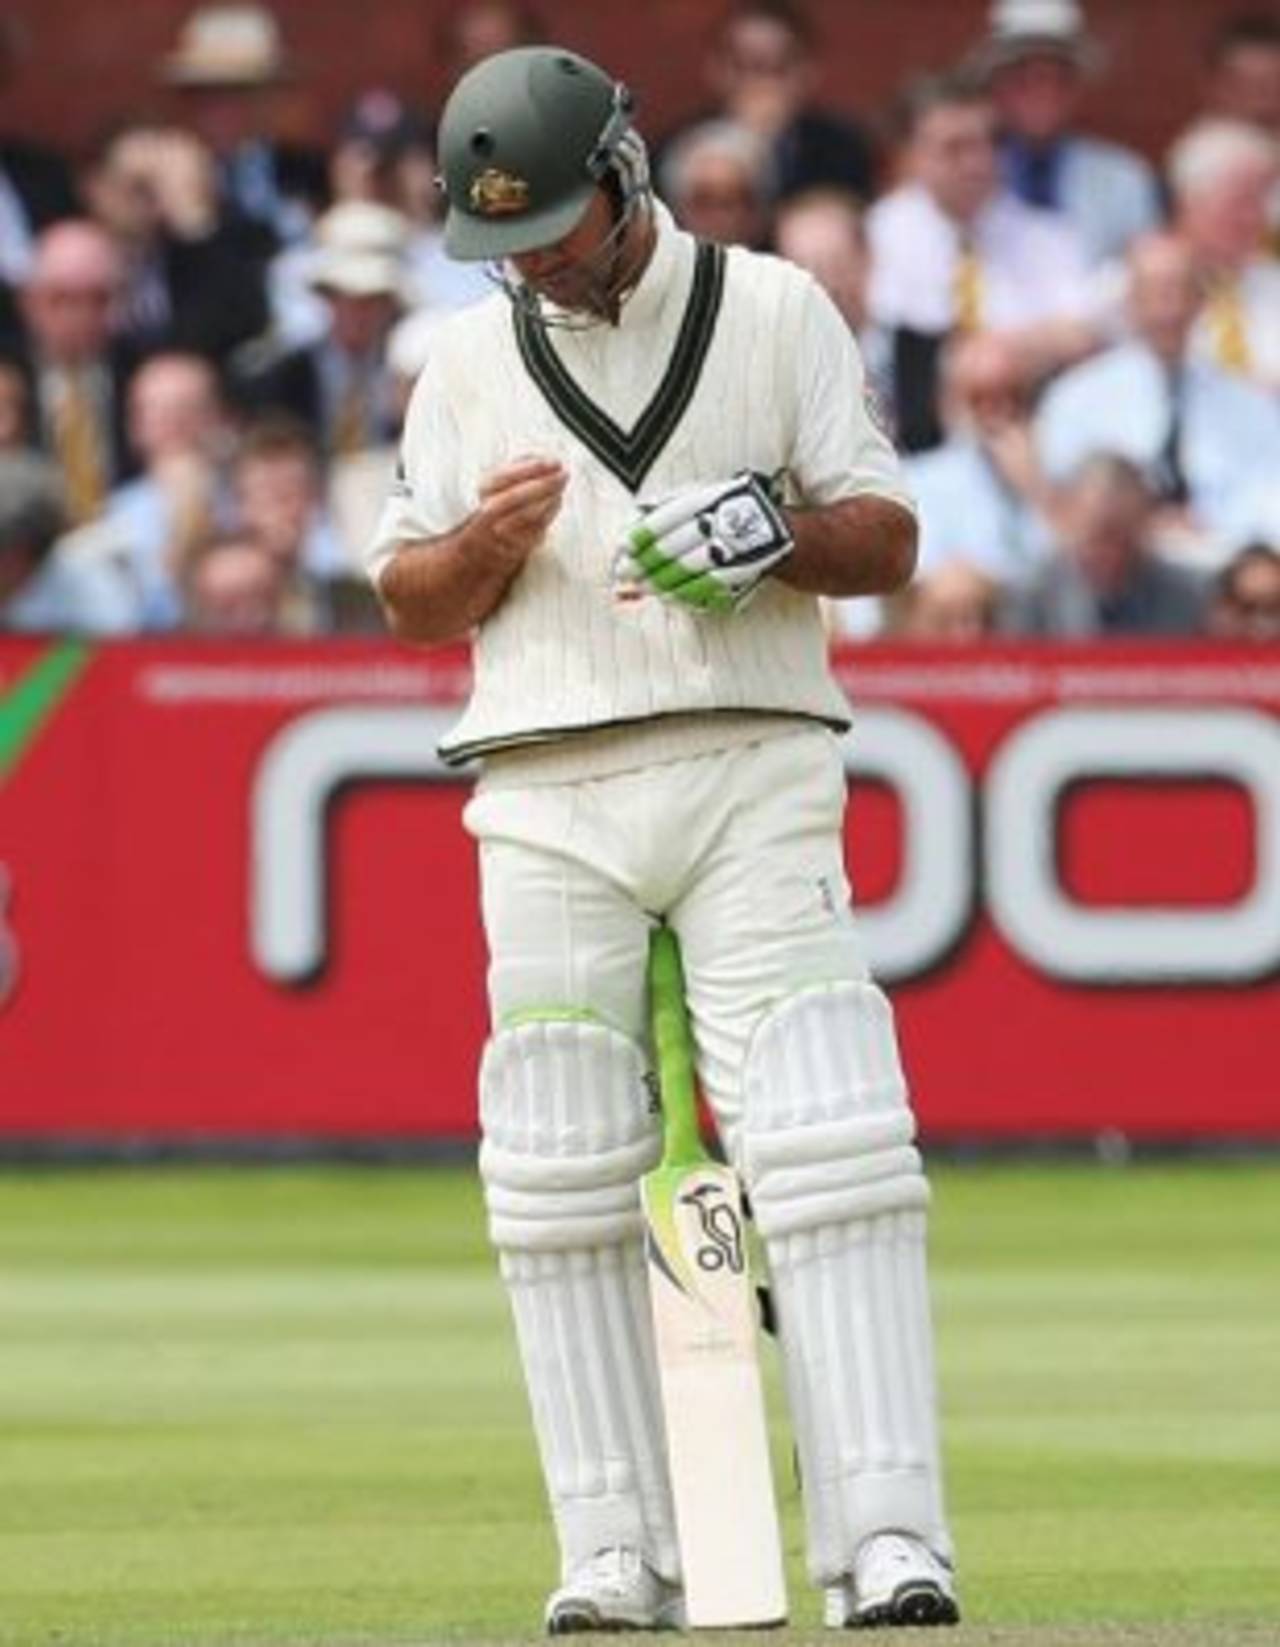 Ricky Ponting examines his wrist after getting hit by James Anderson, England v Australia, 2nd Test, Lord's, 4th day, July 19, 2009